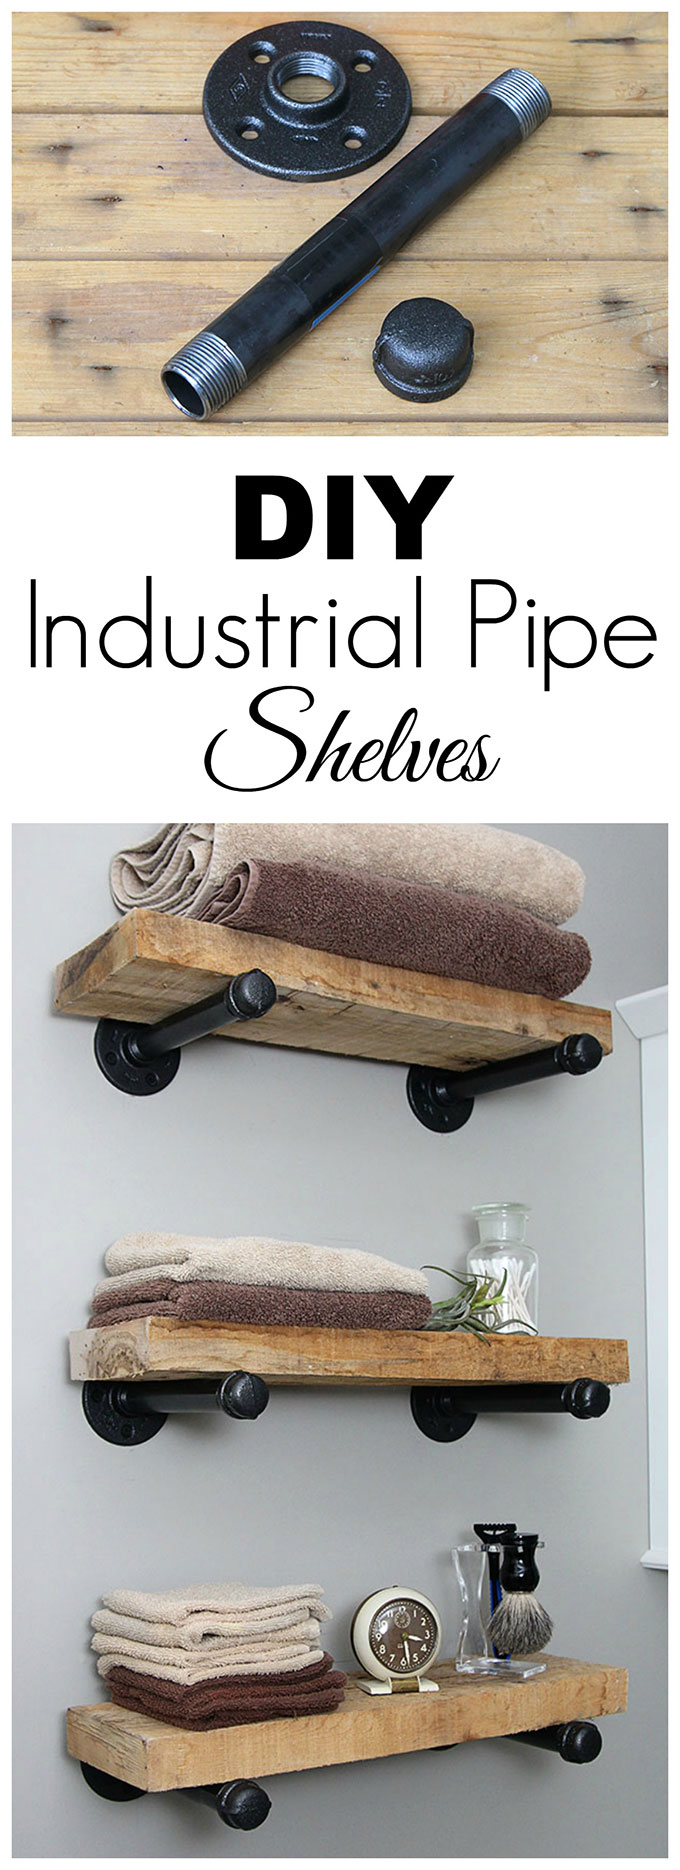 Super easy step by step tutorial for how to make DIY industrial pipe shelves at a fraction of the cost of the store bought version. These would look great with both farmhouse and industrial home decor! #diyproject #industrialstyle #DIYHomeDecor #industrialdecor #homedecorideas